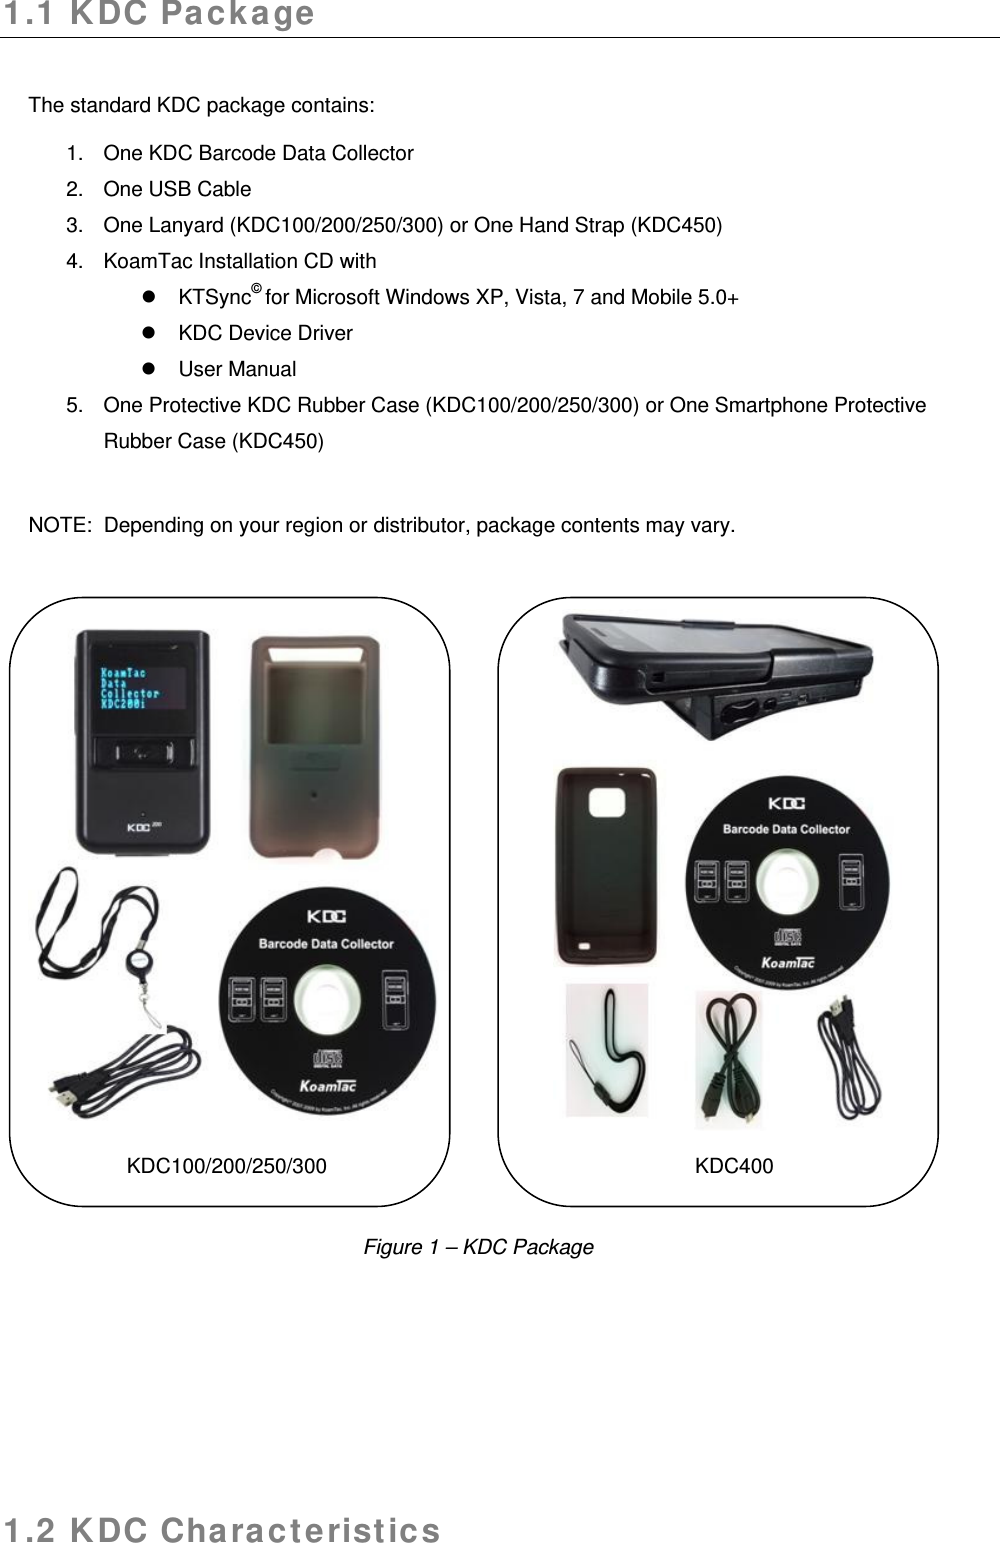 1.1 KDC Package  The standard KDC package contains: 1.  One KDC Barcode Data Collector 2.  One USB Cable 3. One Lanyard (KDC100/200/250/300) or One Hand Strap (KDC450) 4.  KoamTac Installation CD with  KTSync© for Microsoft Windows XP, Vista, 7 and Mobile 5.0+   KDC Device Driver    User Manual 5.  One Protective KDC Rubber Case (KDC100/200/250/300) or One Smartphone Protective Rubber Case (KDC450)   NOTE:  Depending on your region or distributor, package contents may vary.                                       KDC100/200/250/300                KDC400       1.2 KDC Characteristics  Figure 1 – KDC Package 